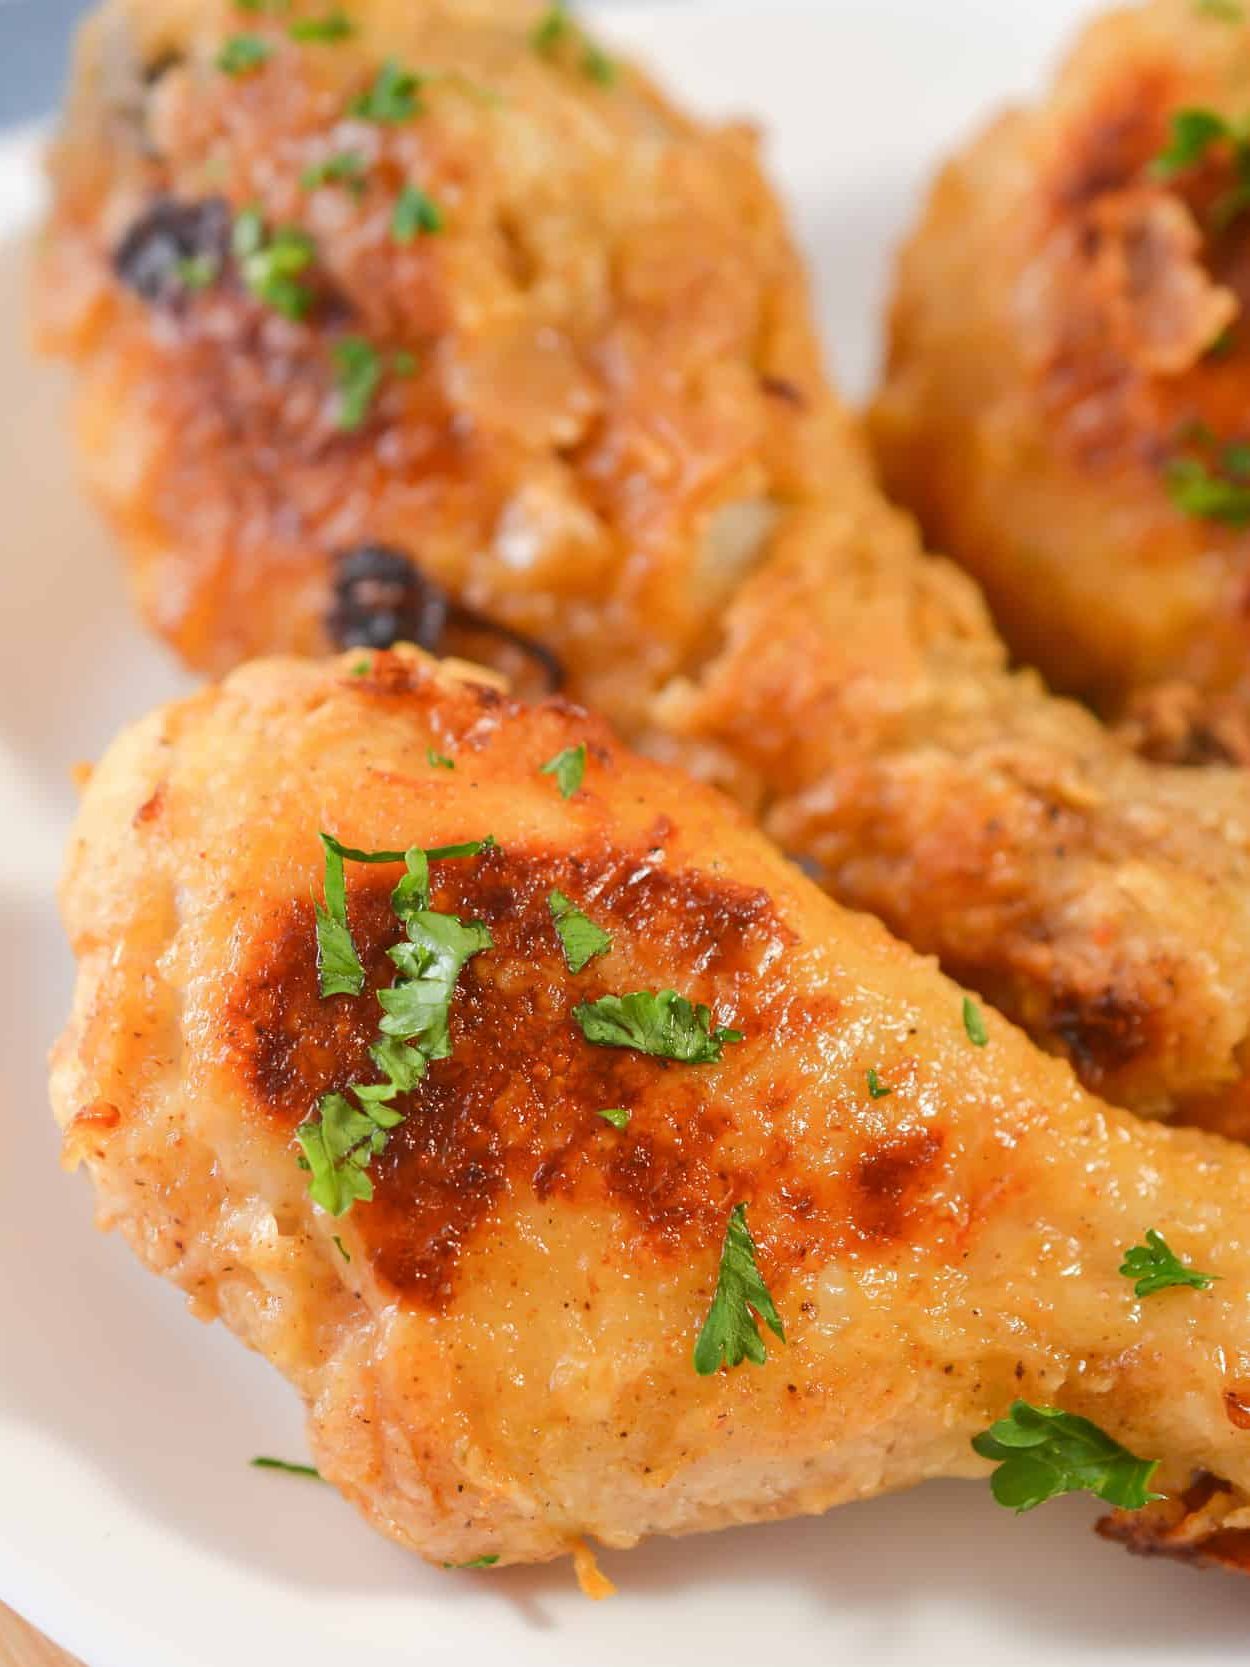 Baked Fried Chicken